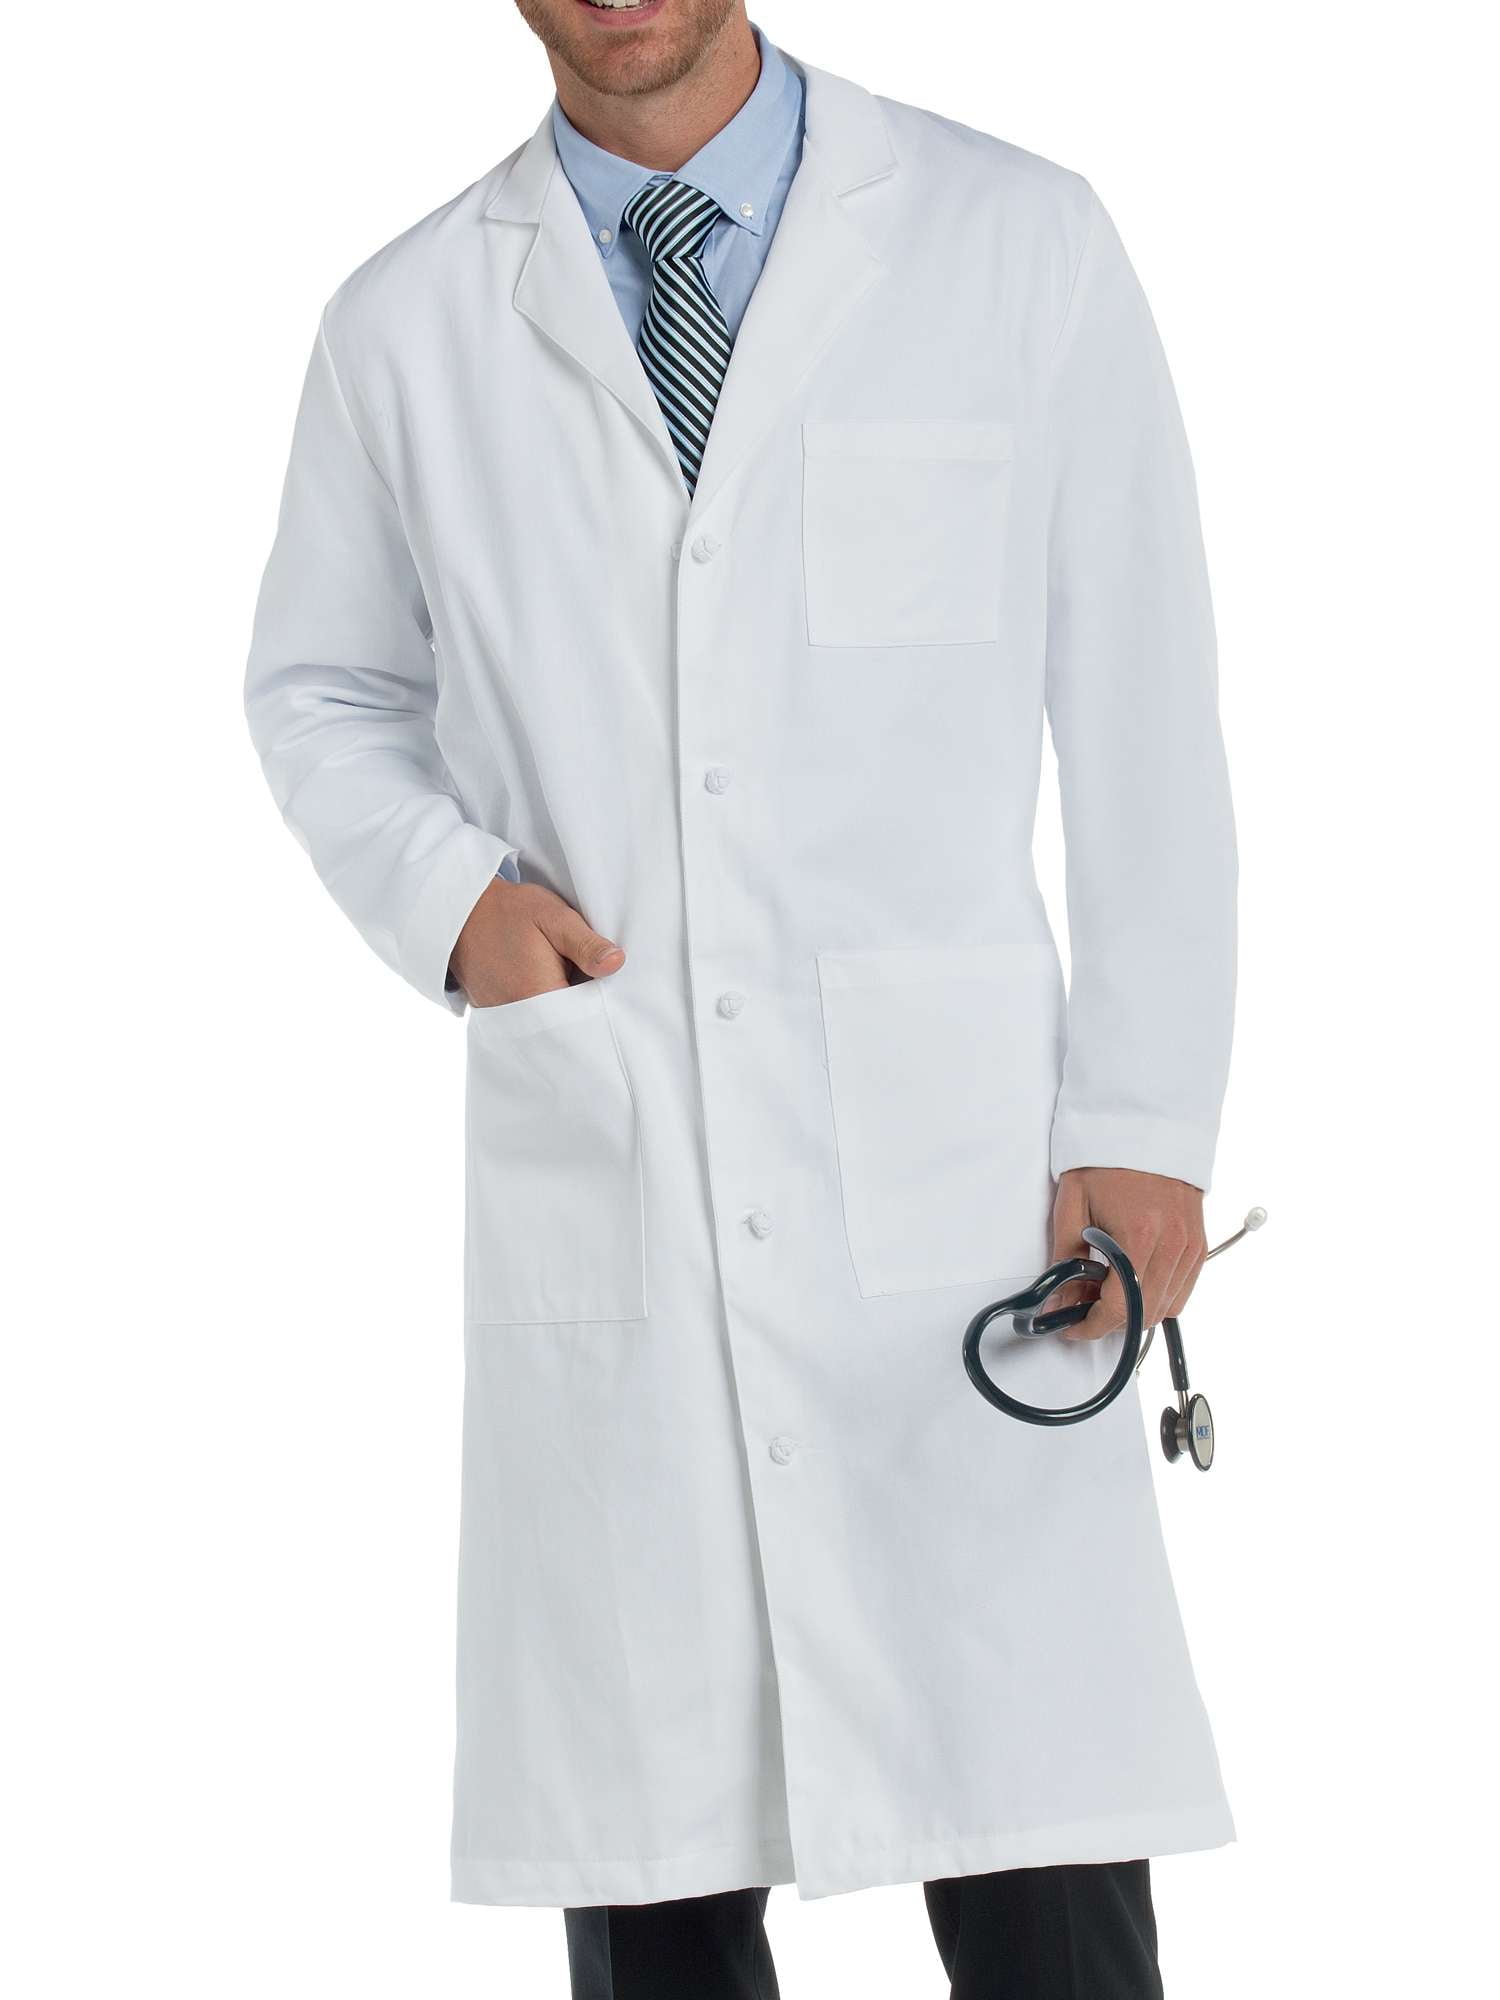 Landau 4 Button Mens Lab Coat With 3 Front Pockets 3163 SHIPS FREE! 